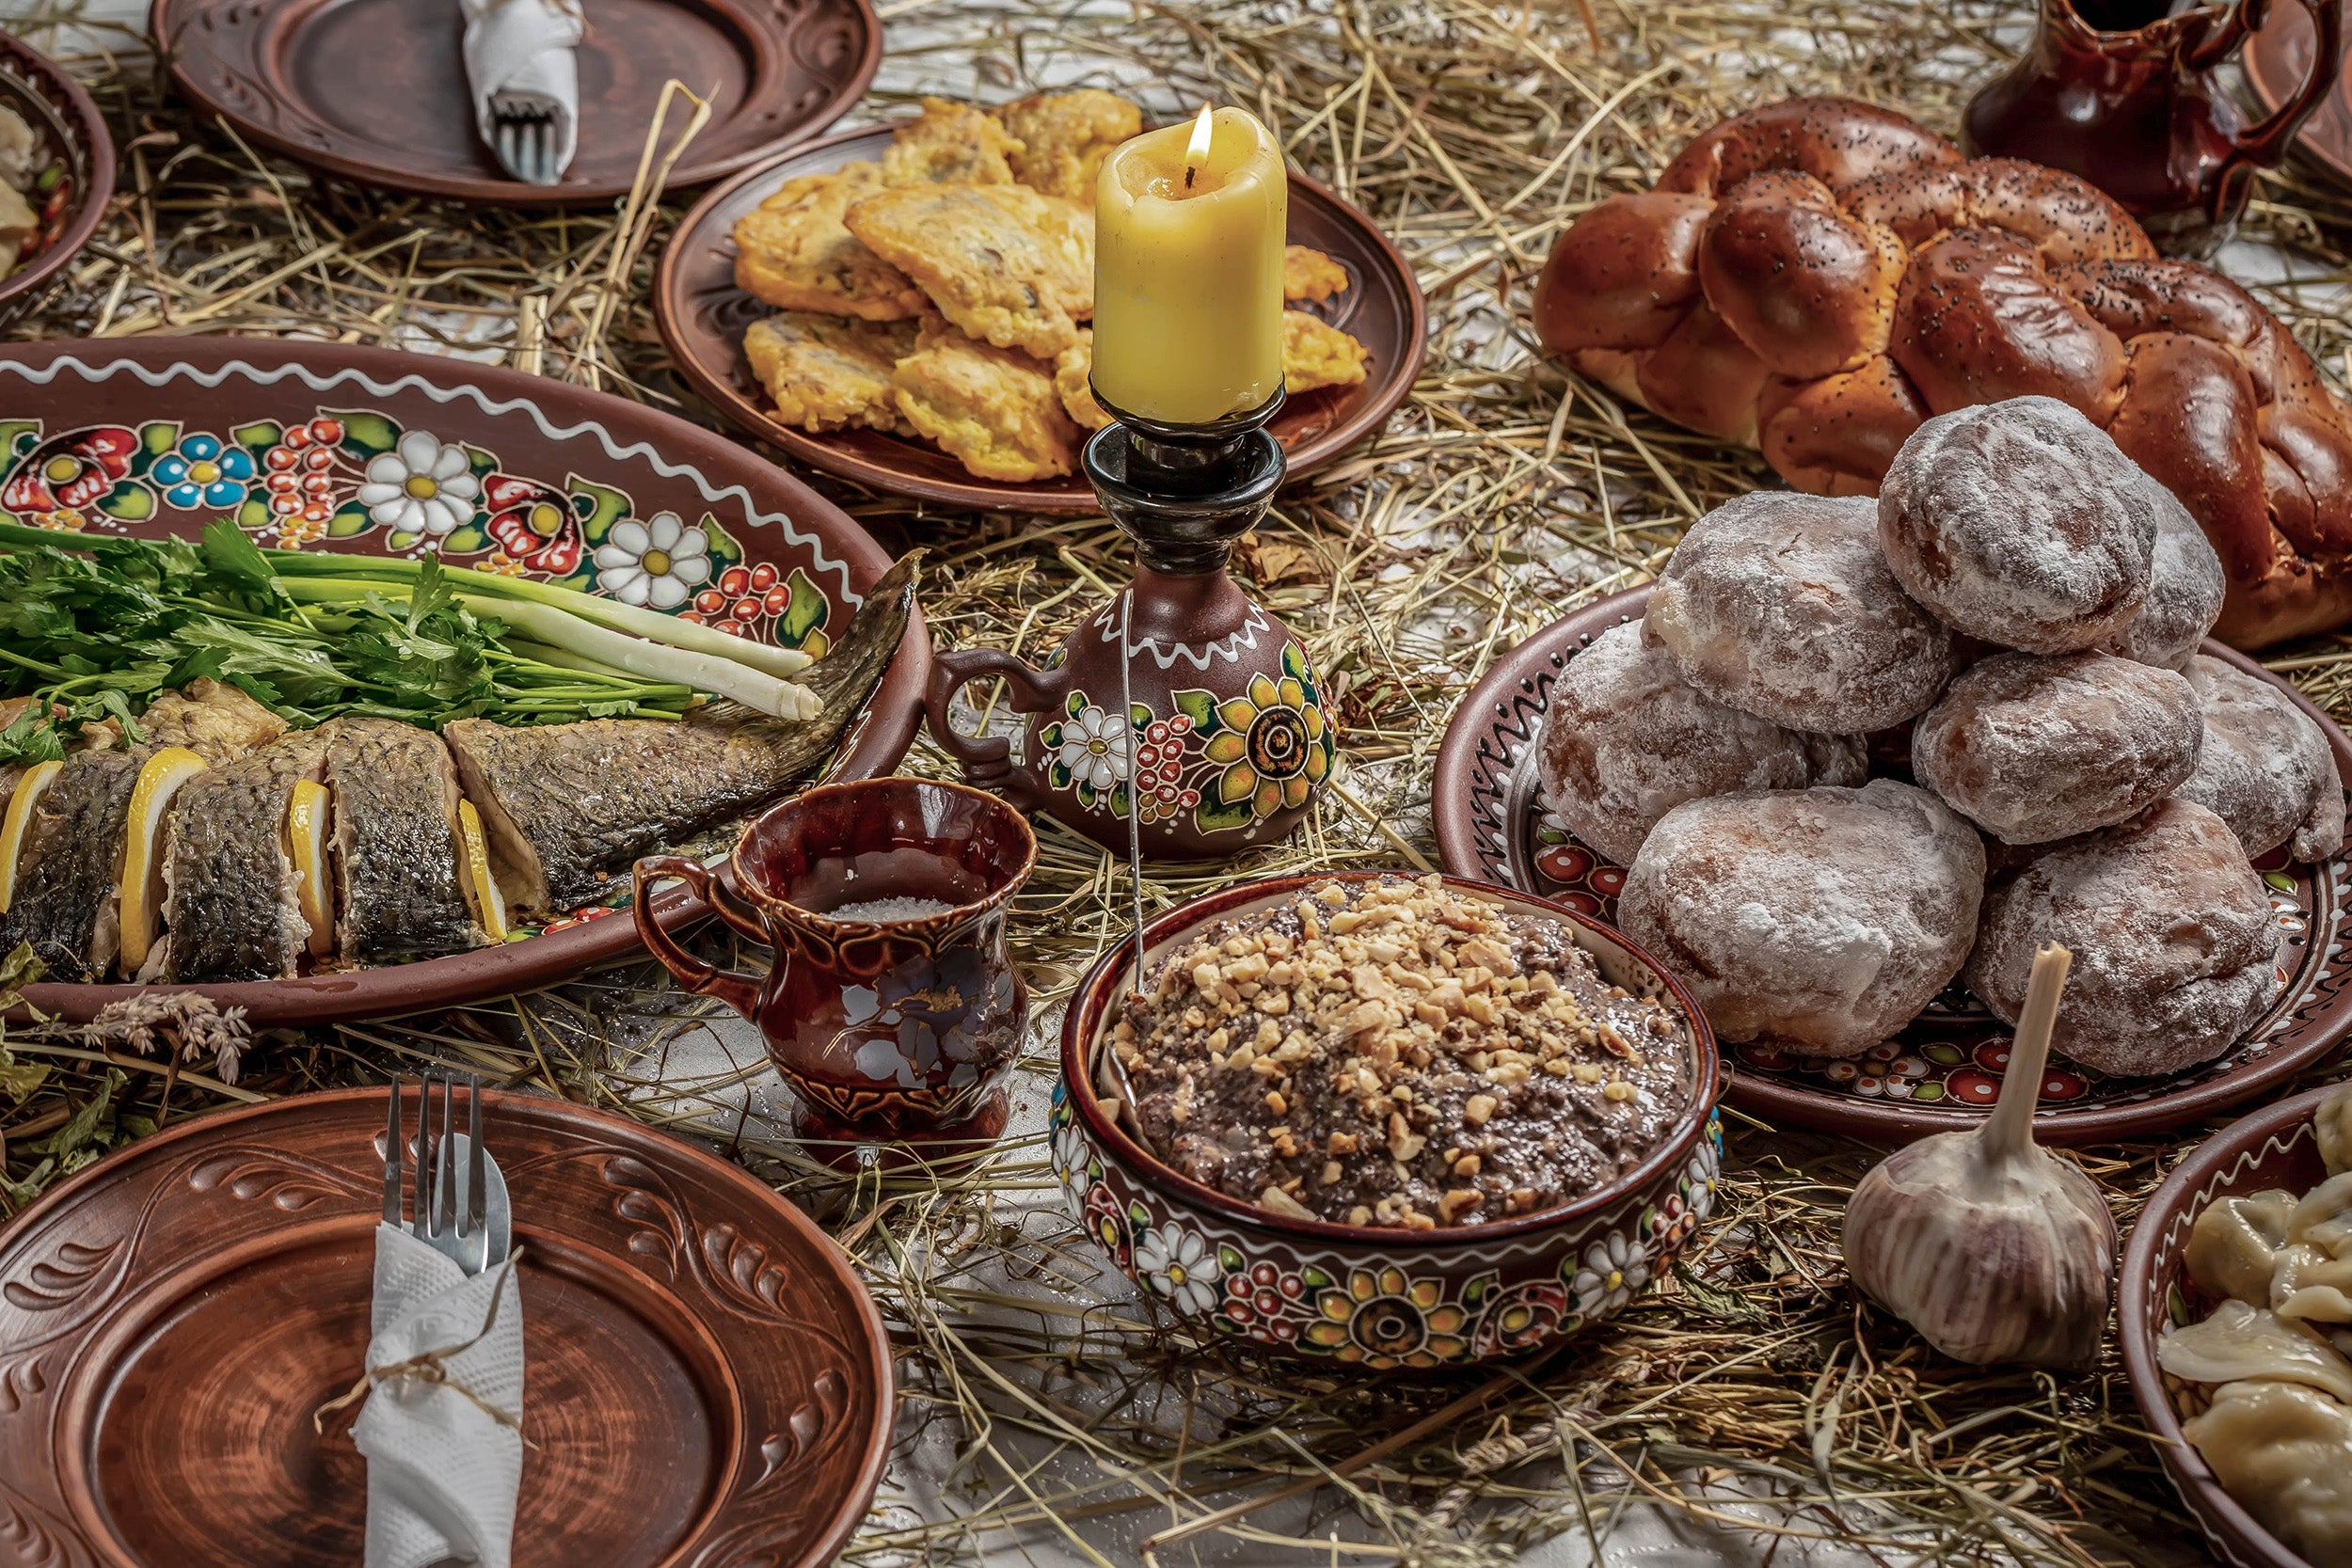 Ukrainian Easter Traditions: Festive Dishes For Your Holiday Table -  Matusya's Kitchen